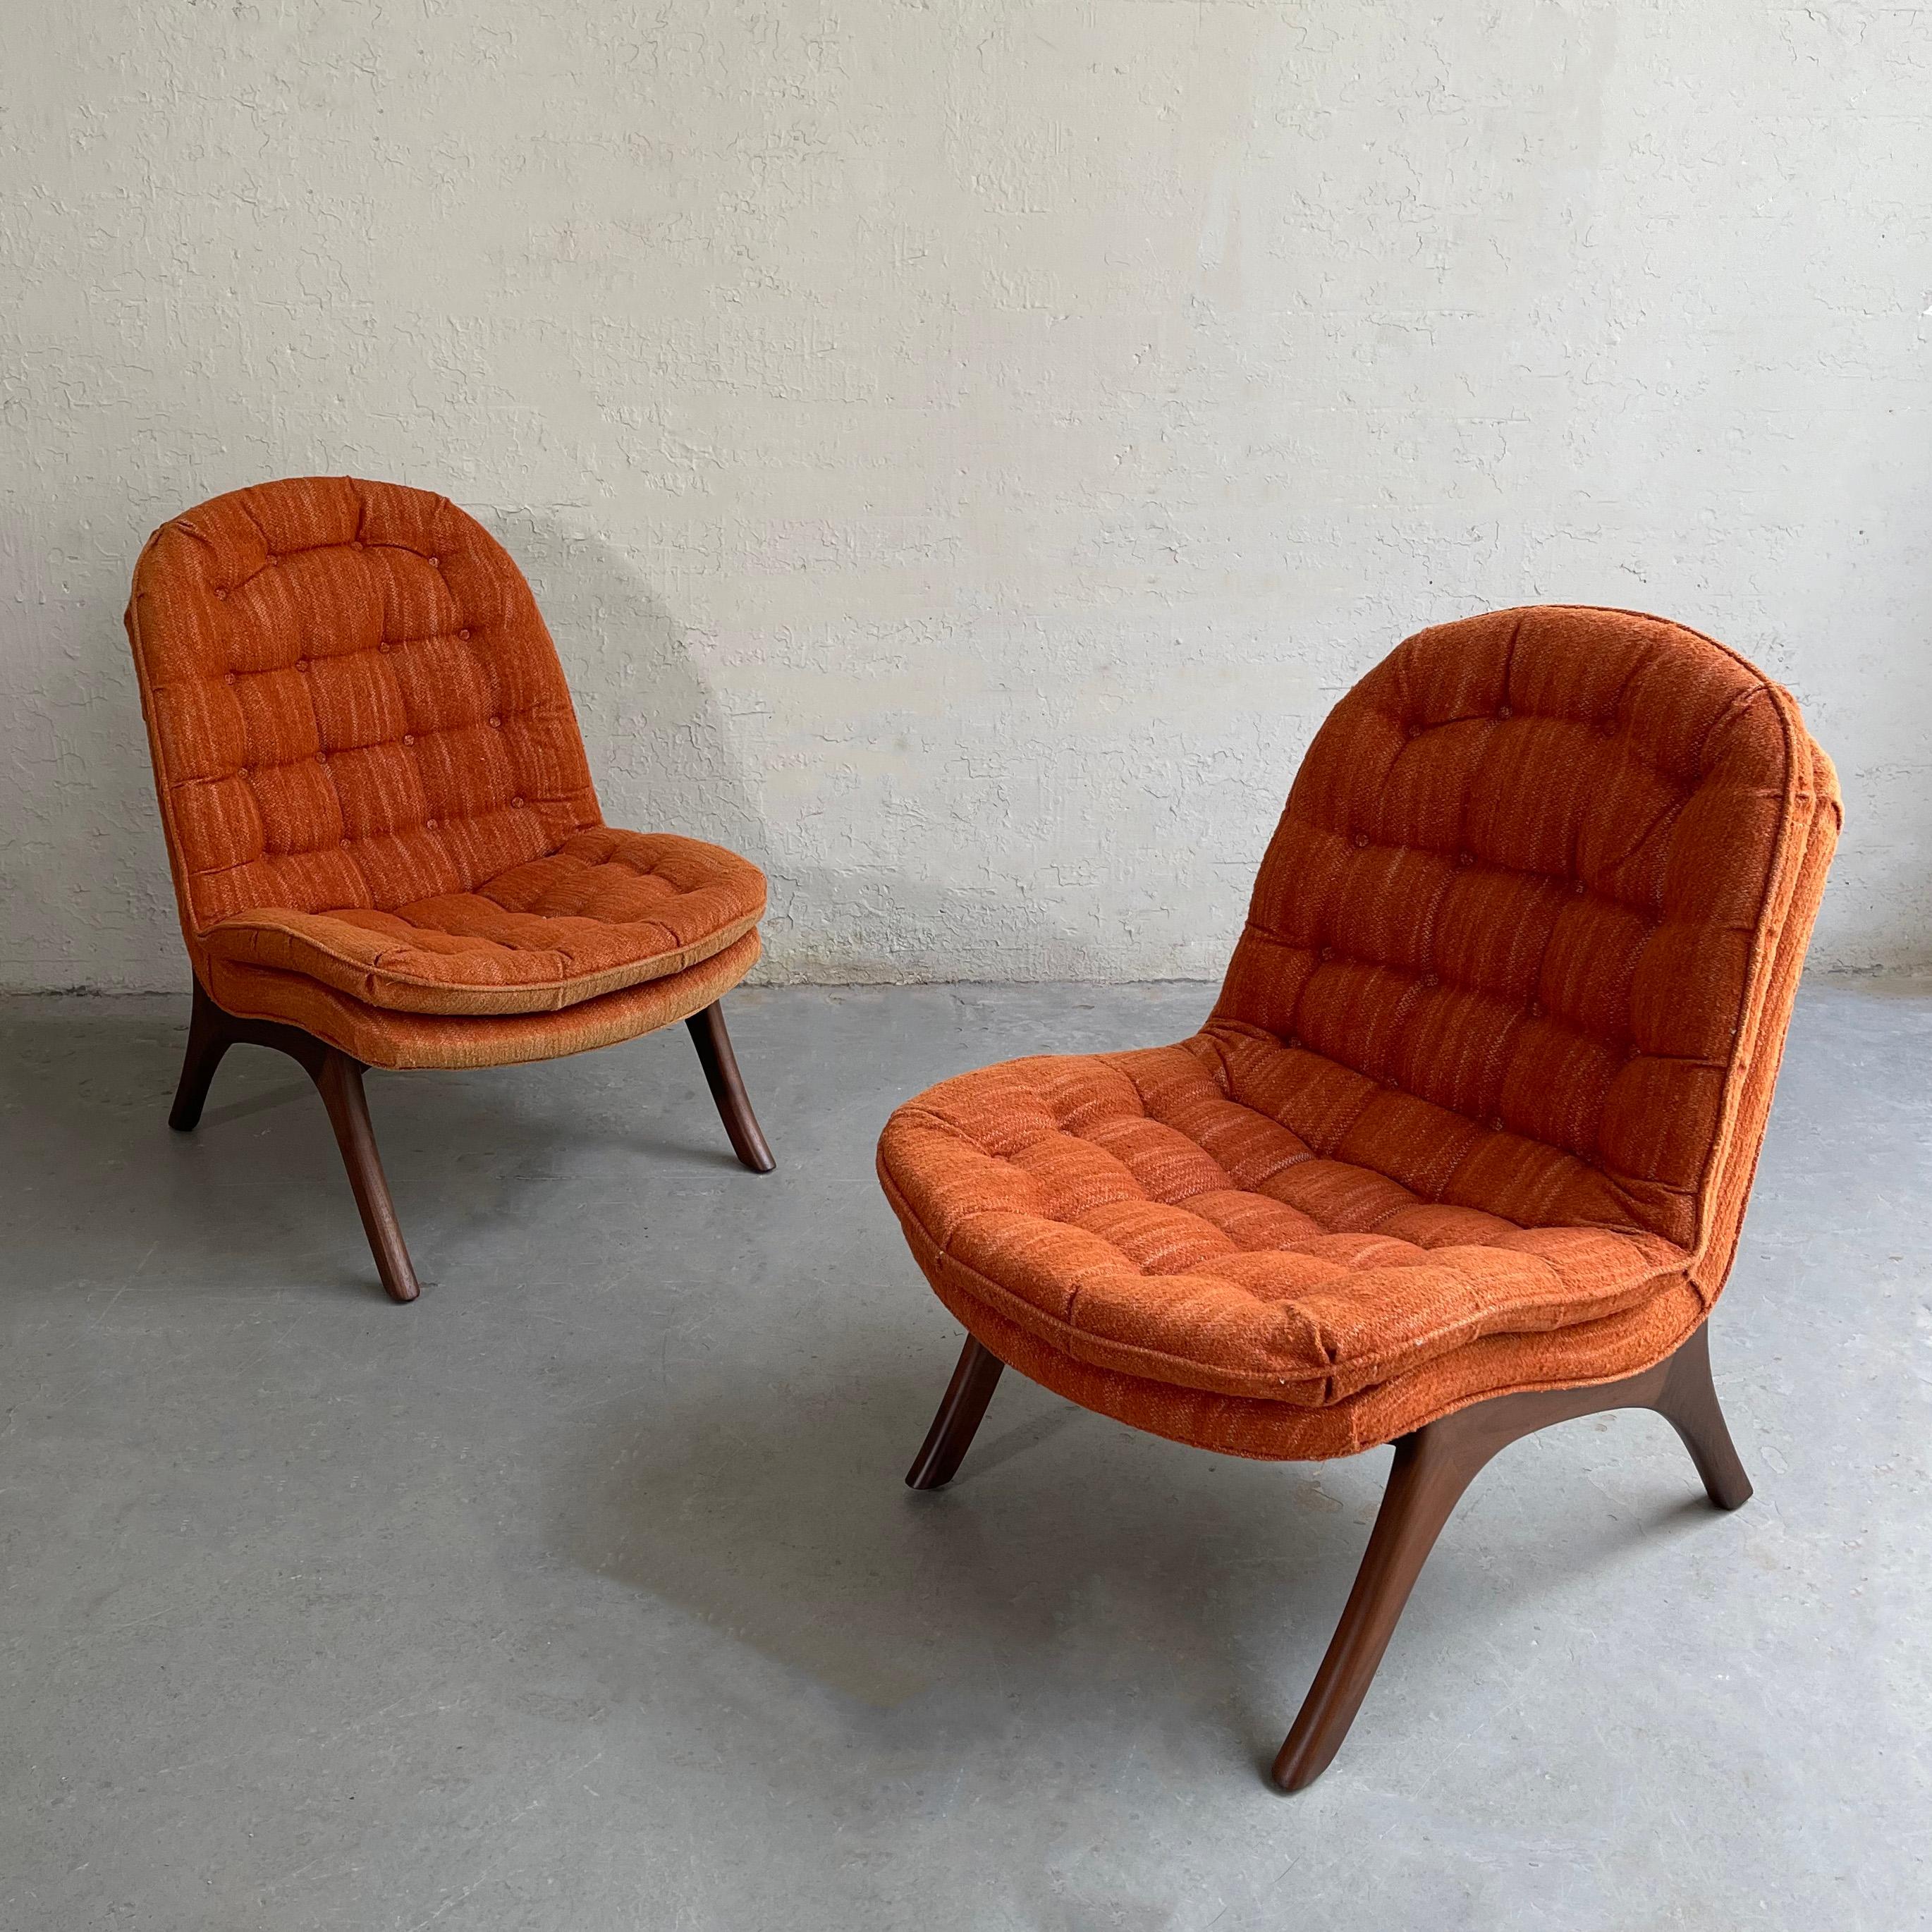 20th Century Mid-Century Modern Slipper Chairs By Adrian Pearsall For Craft Associates